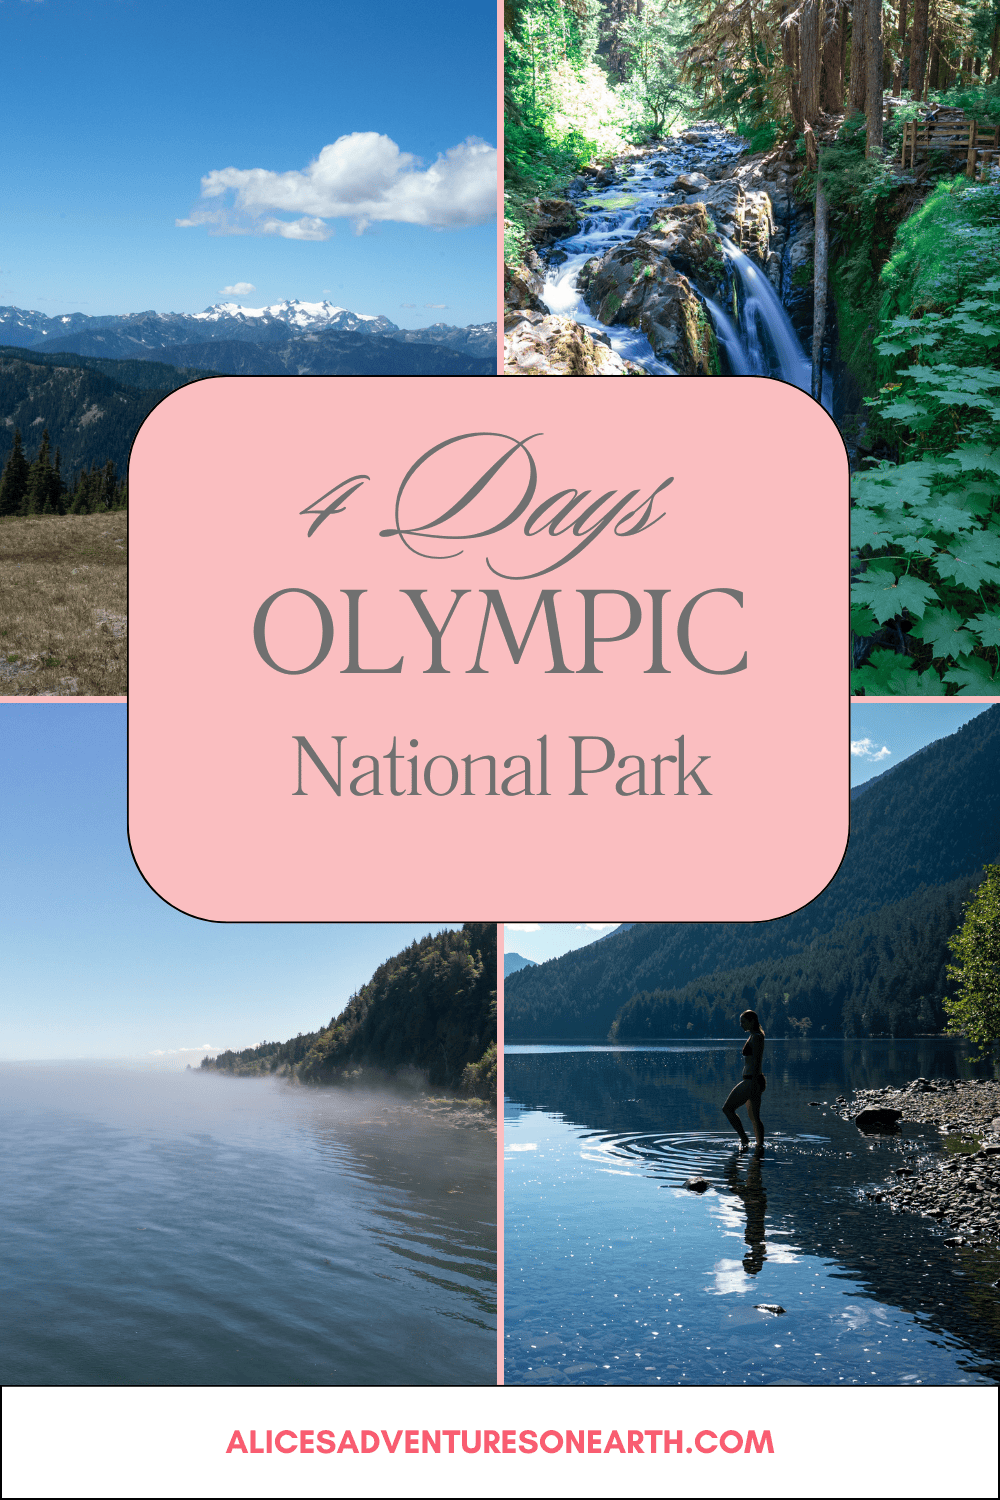 Experience 4 days exploring Olympic National Park in Washington